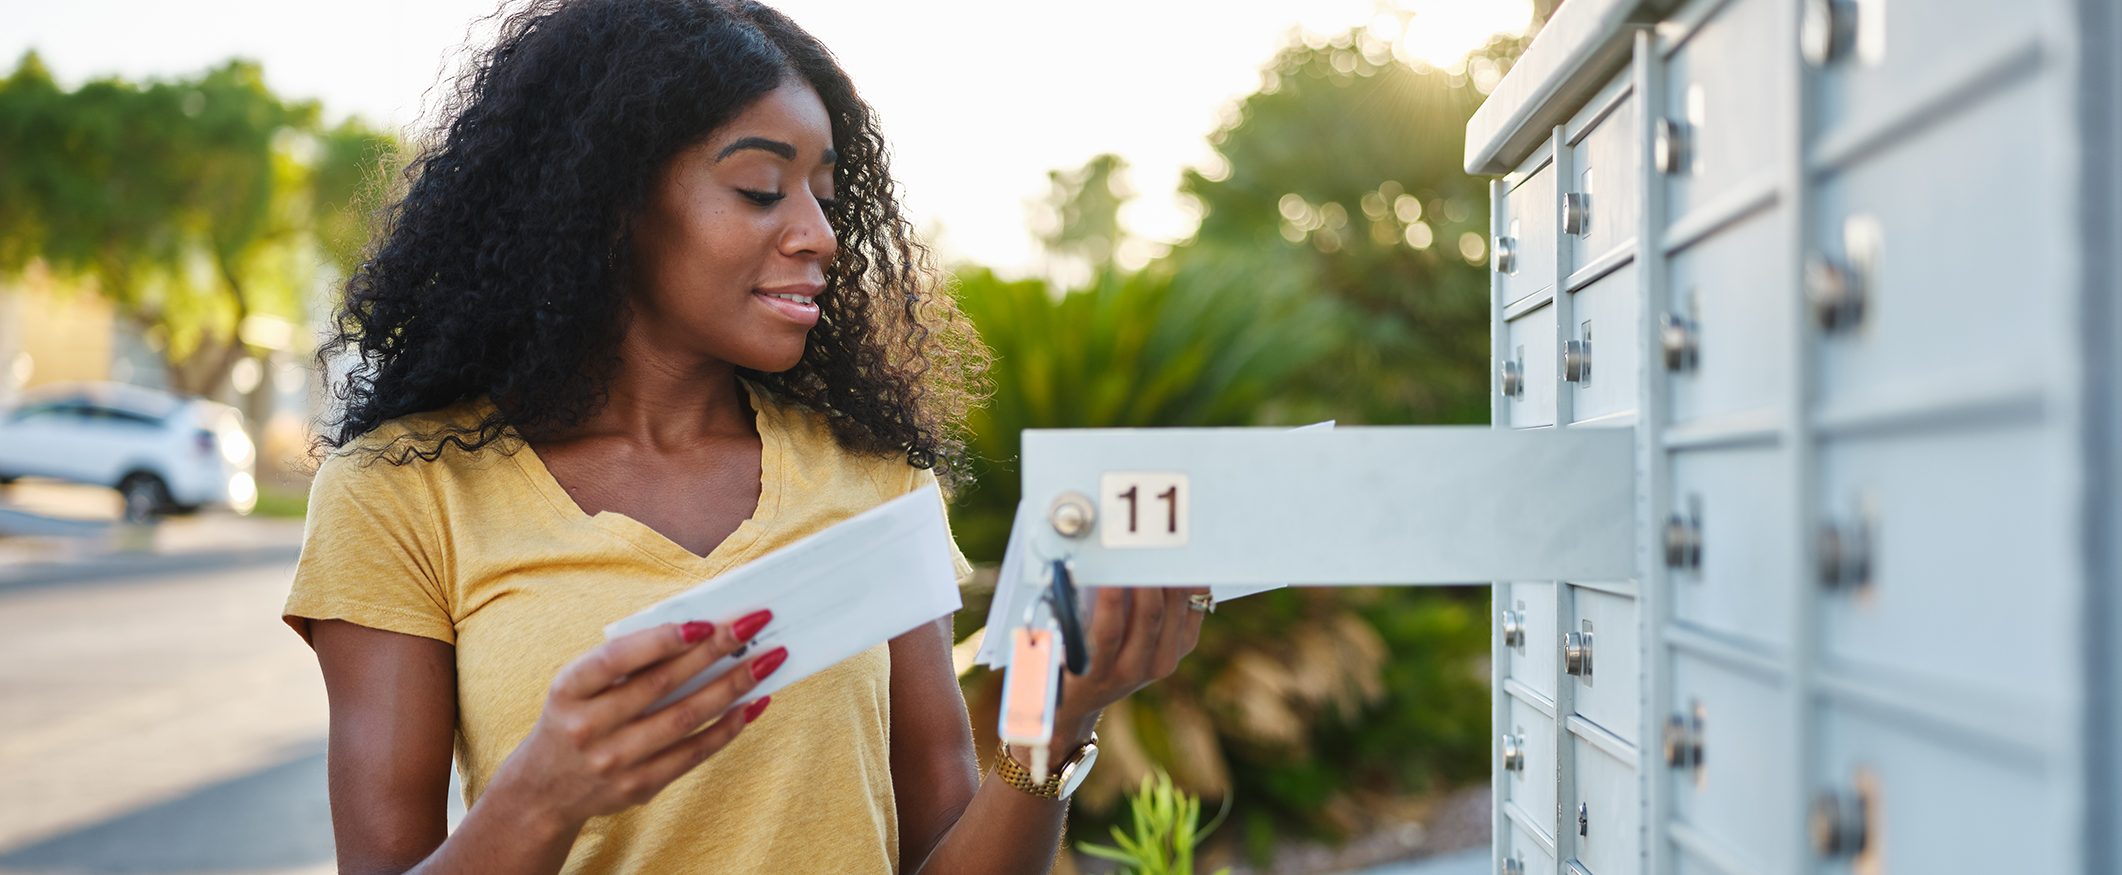 A woman wearing a yellow t-shirt opens her mailbox with a key and looks at some mail.